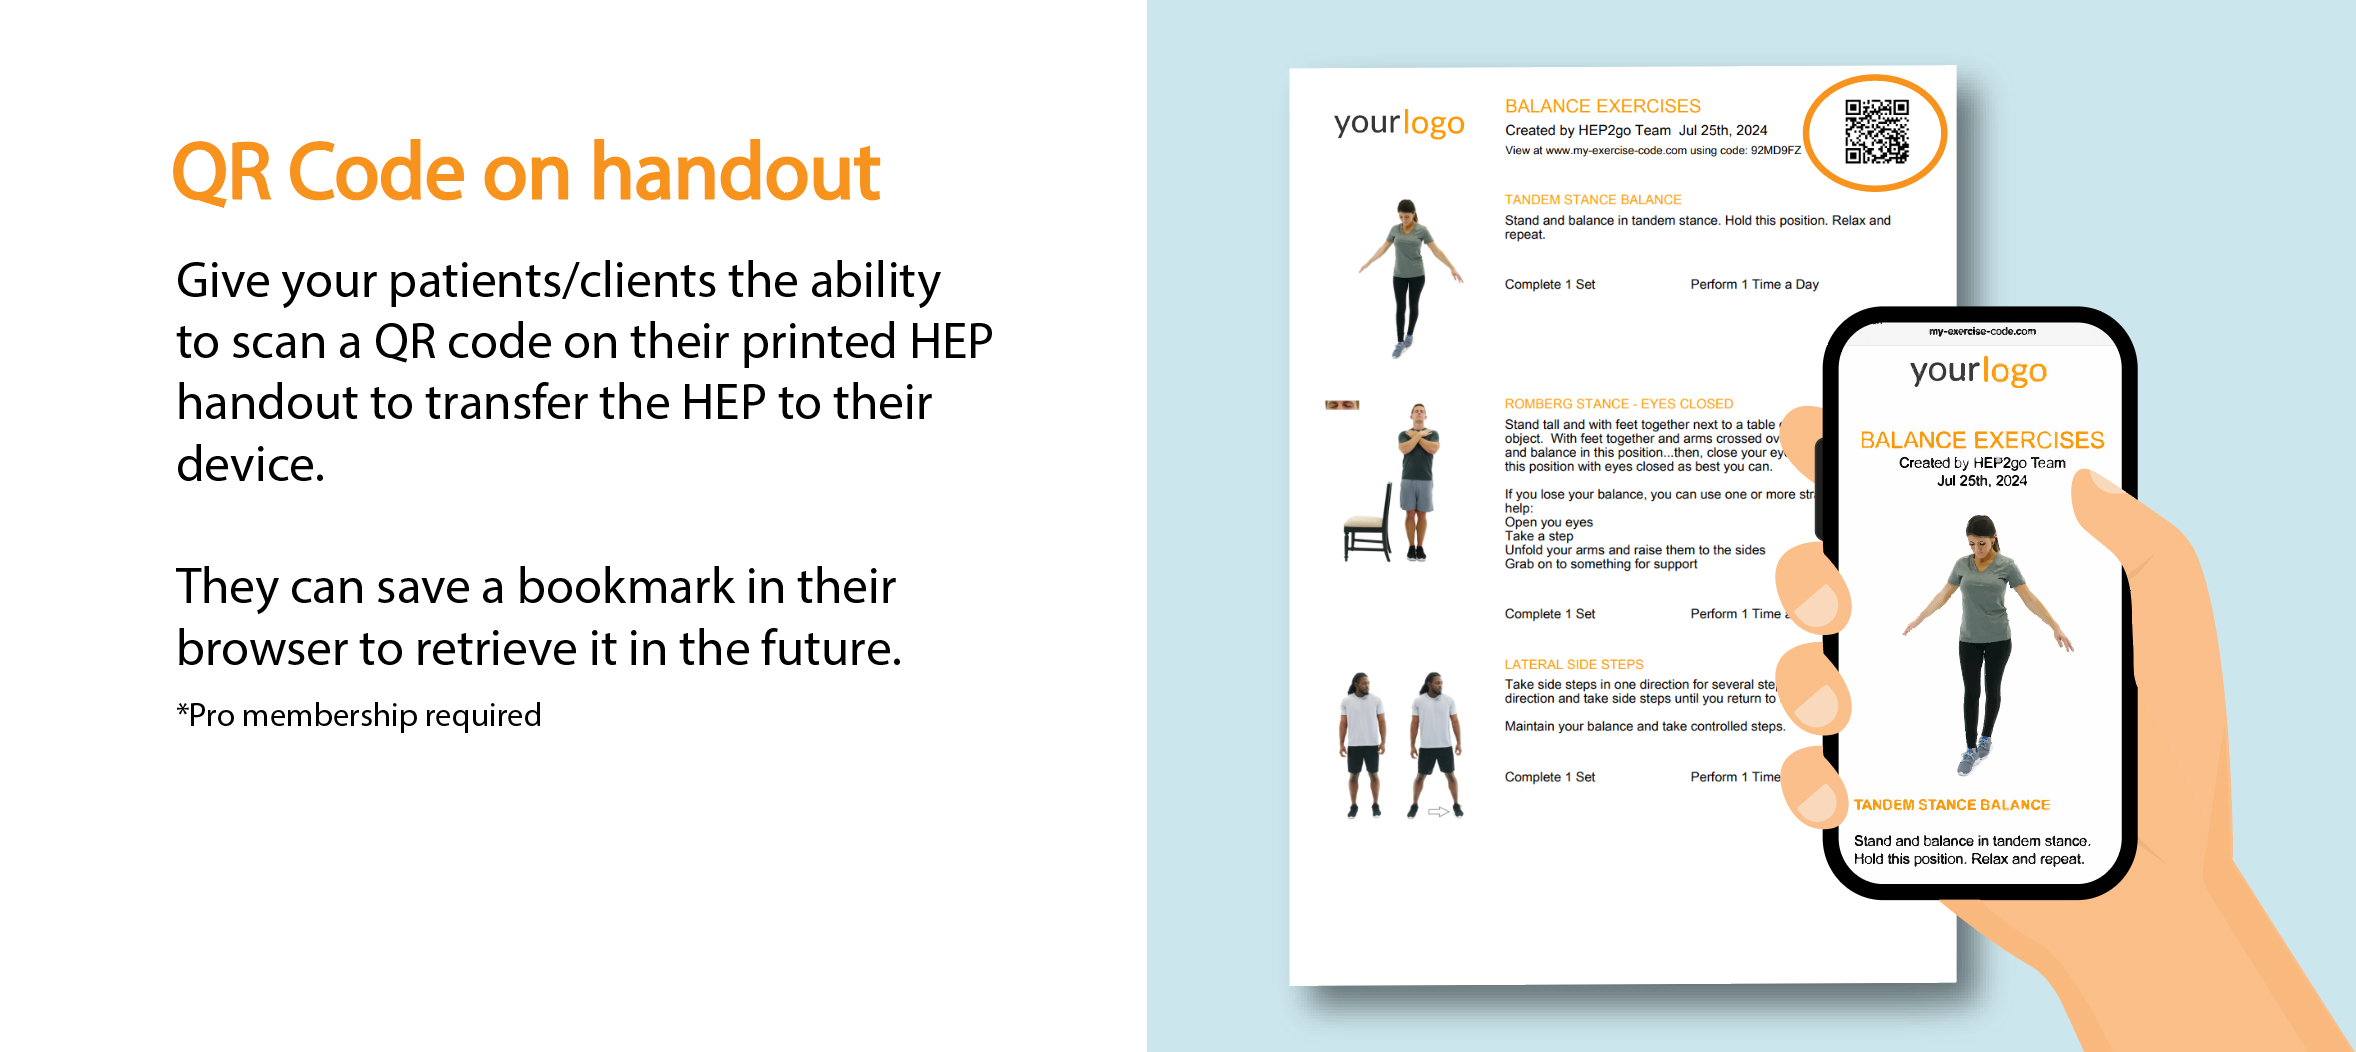 HEP2go is the most advanced and cost effective Home Excercise Progam, and the first to utilize secure QR codes for excercise program delivery.  QR codes allow patients quick access to view prescribed online exercise programs